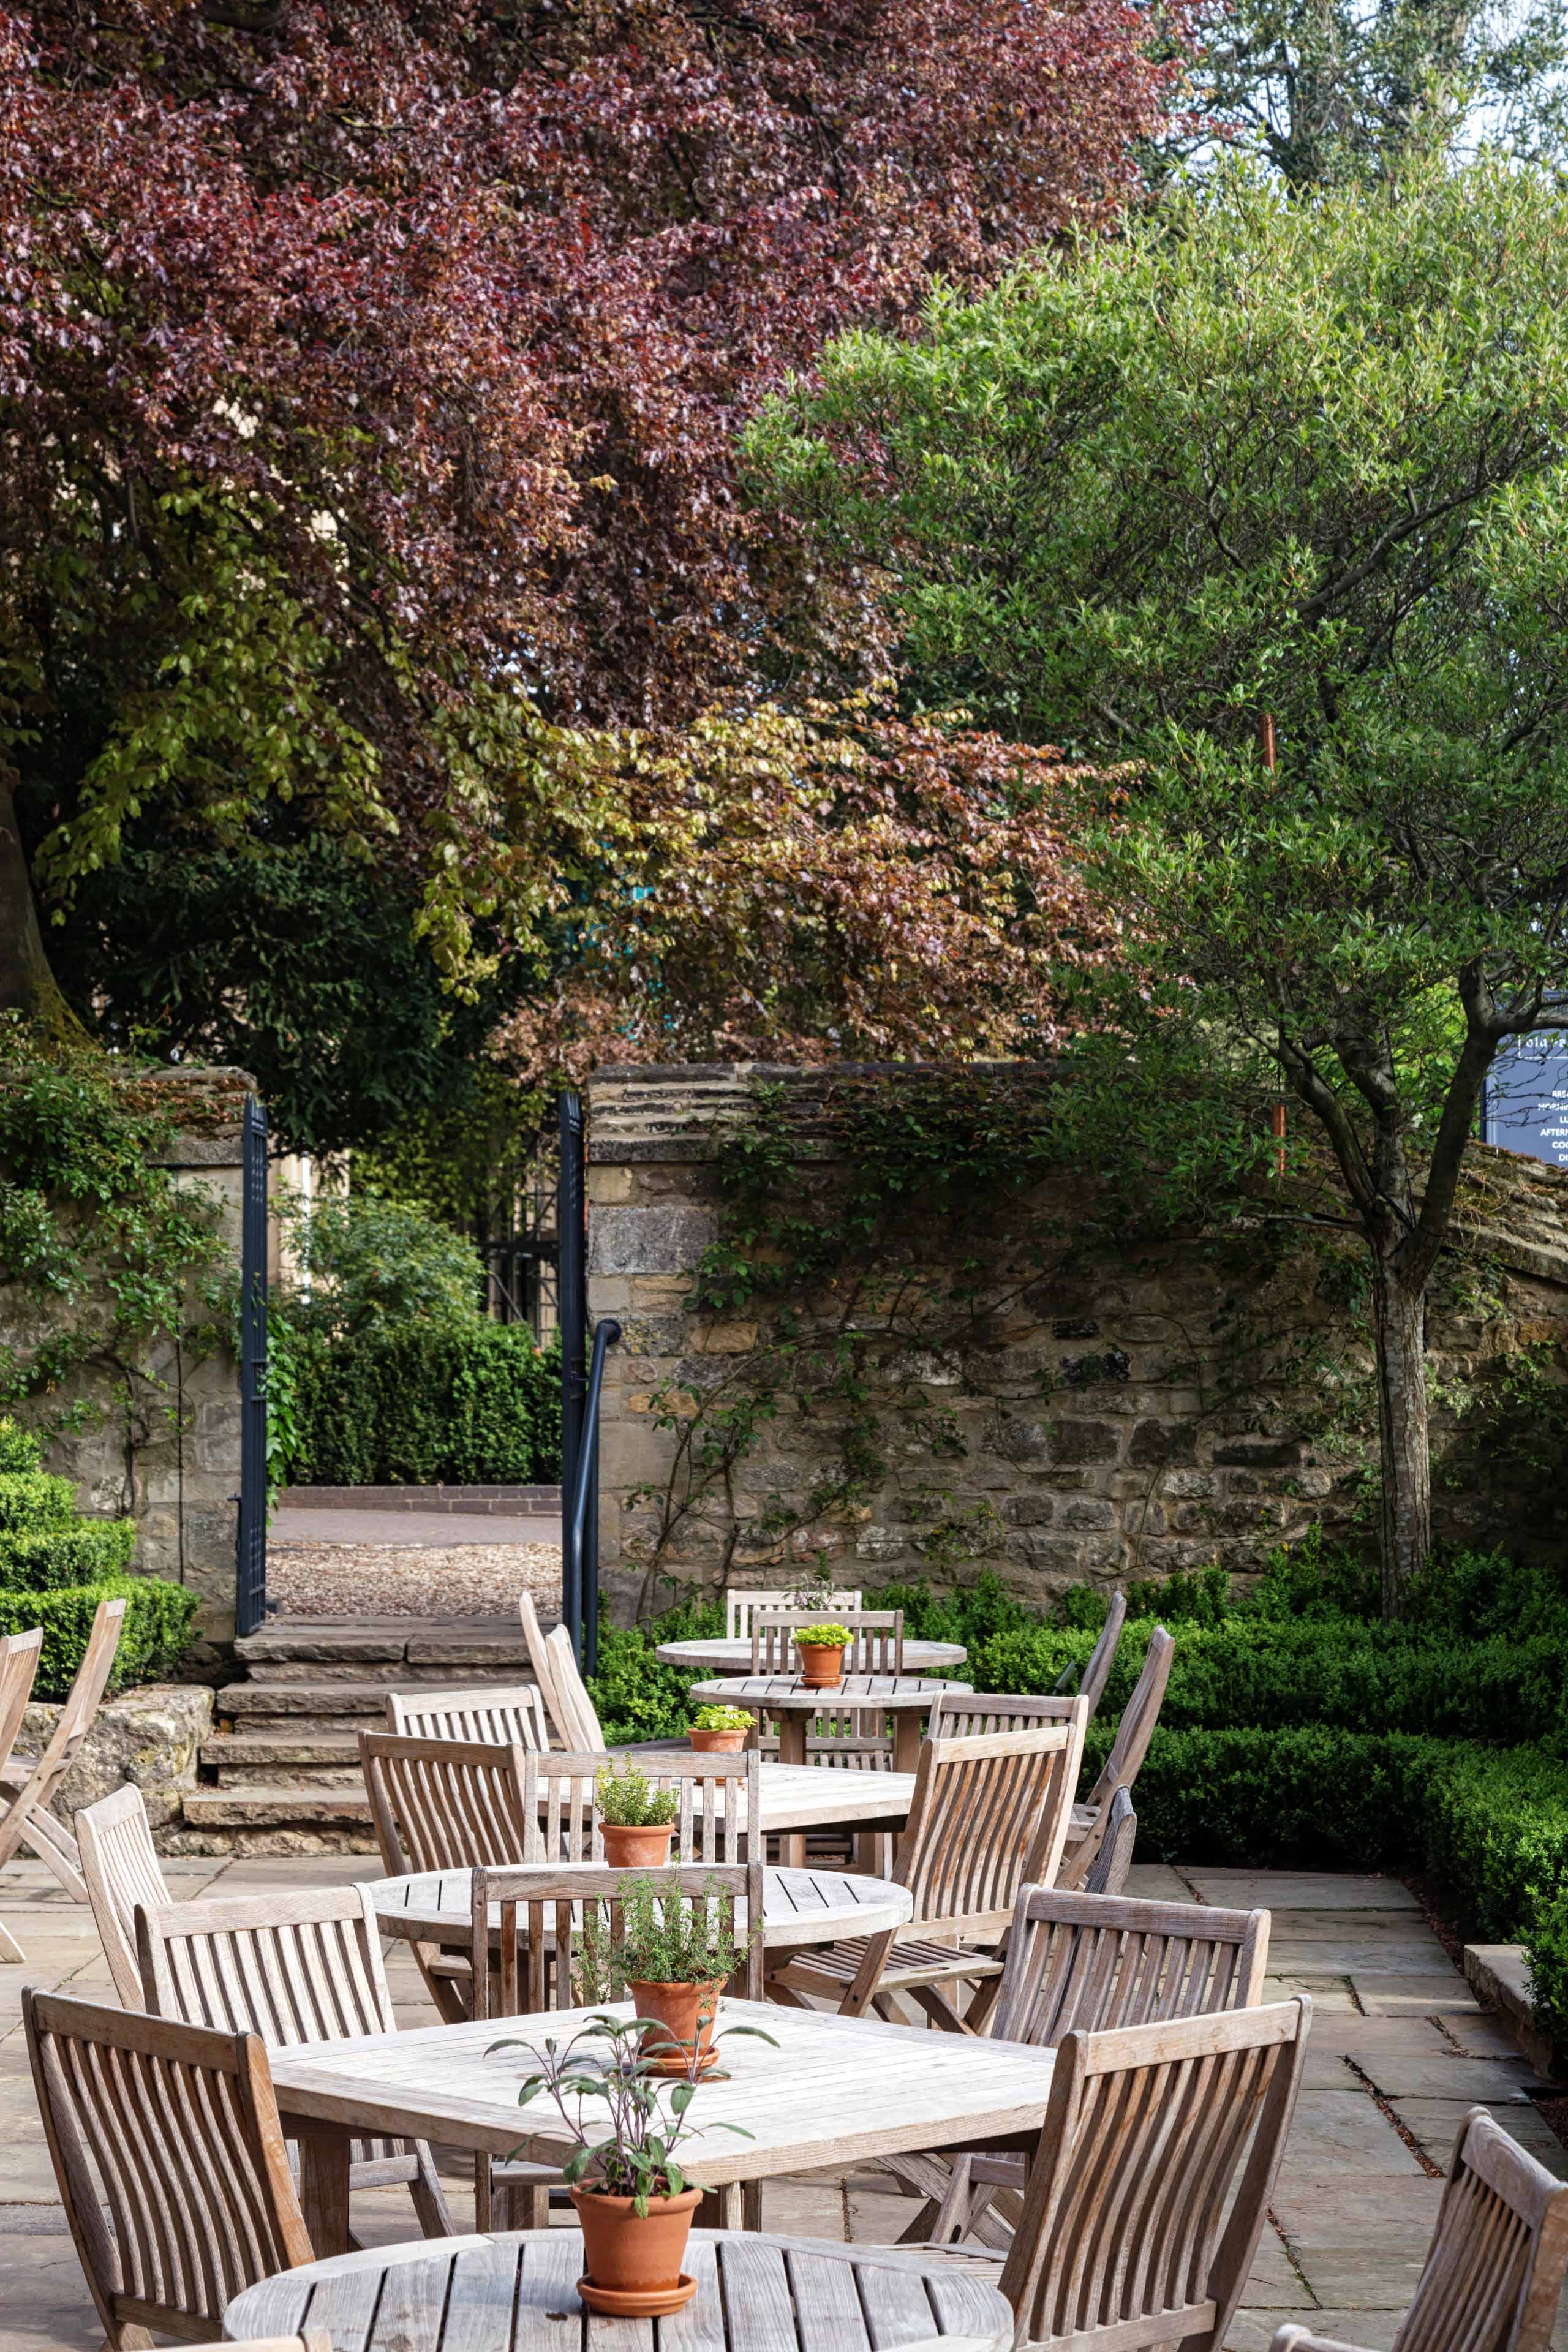 0009 - 2014 - Parsonage Grill - Oxford - Low Res - Terrace Dining - Web Hero